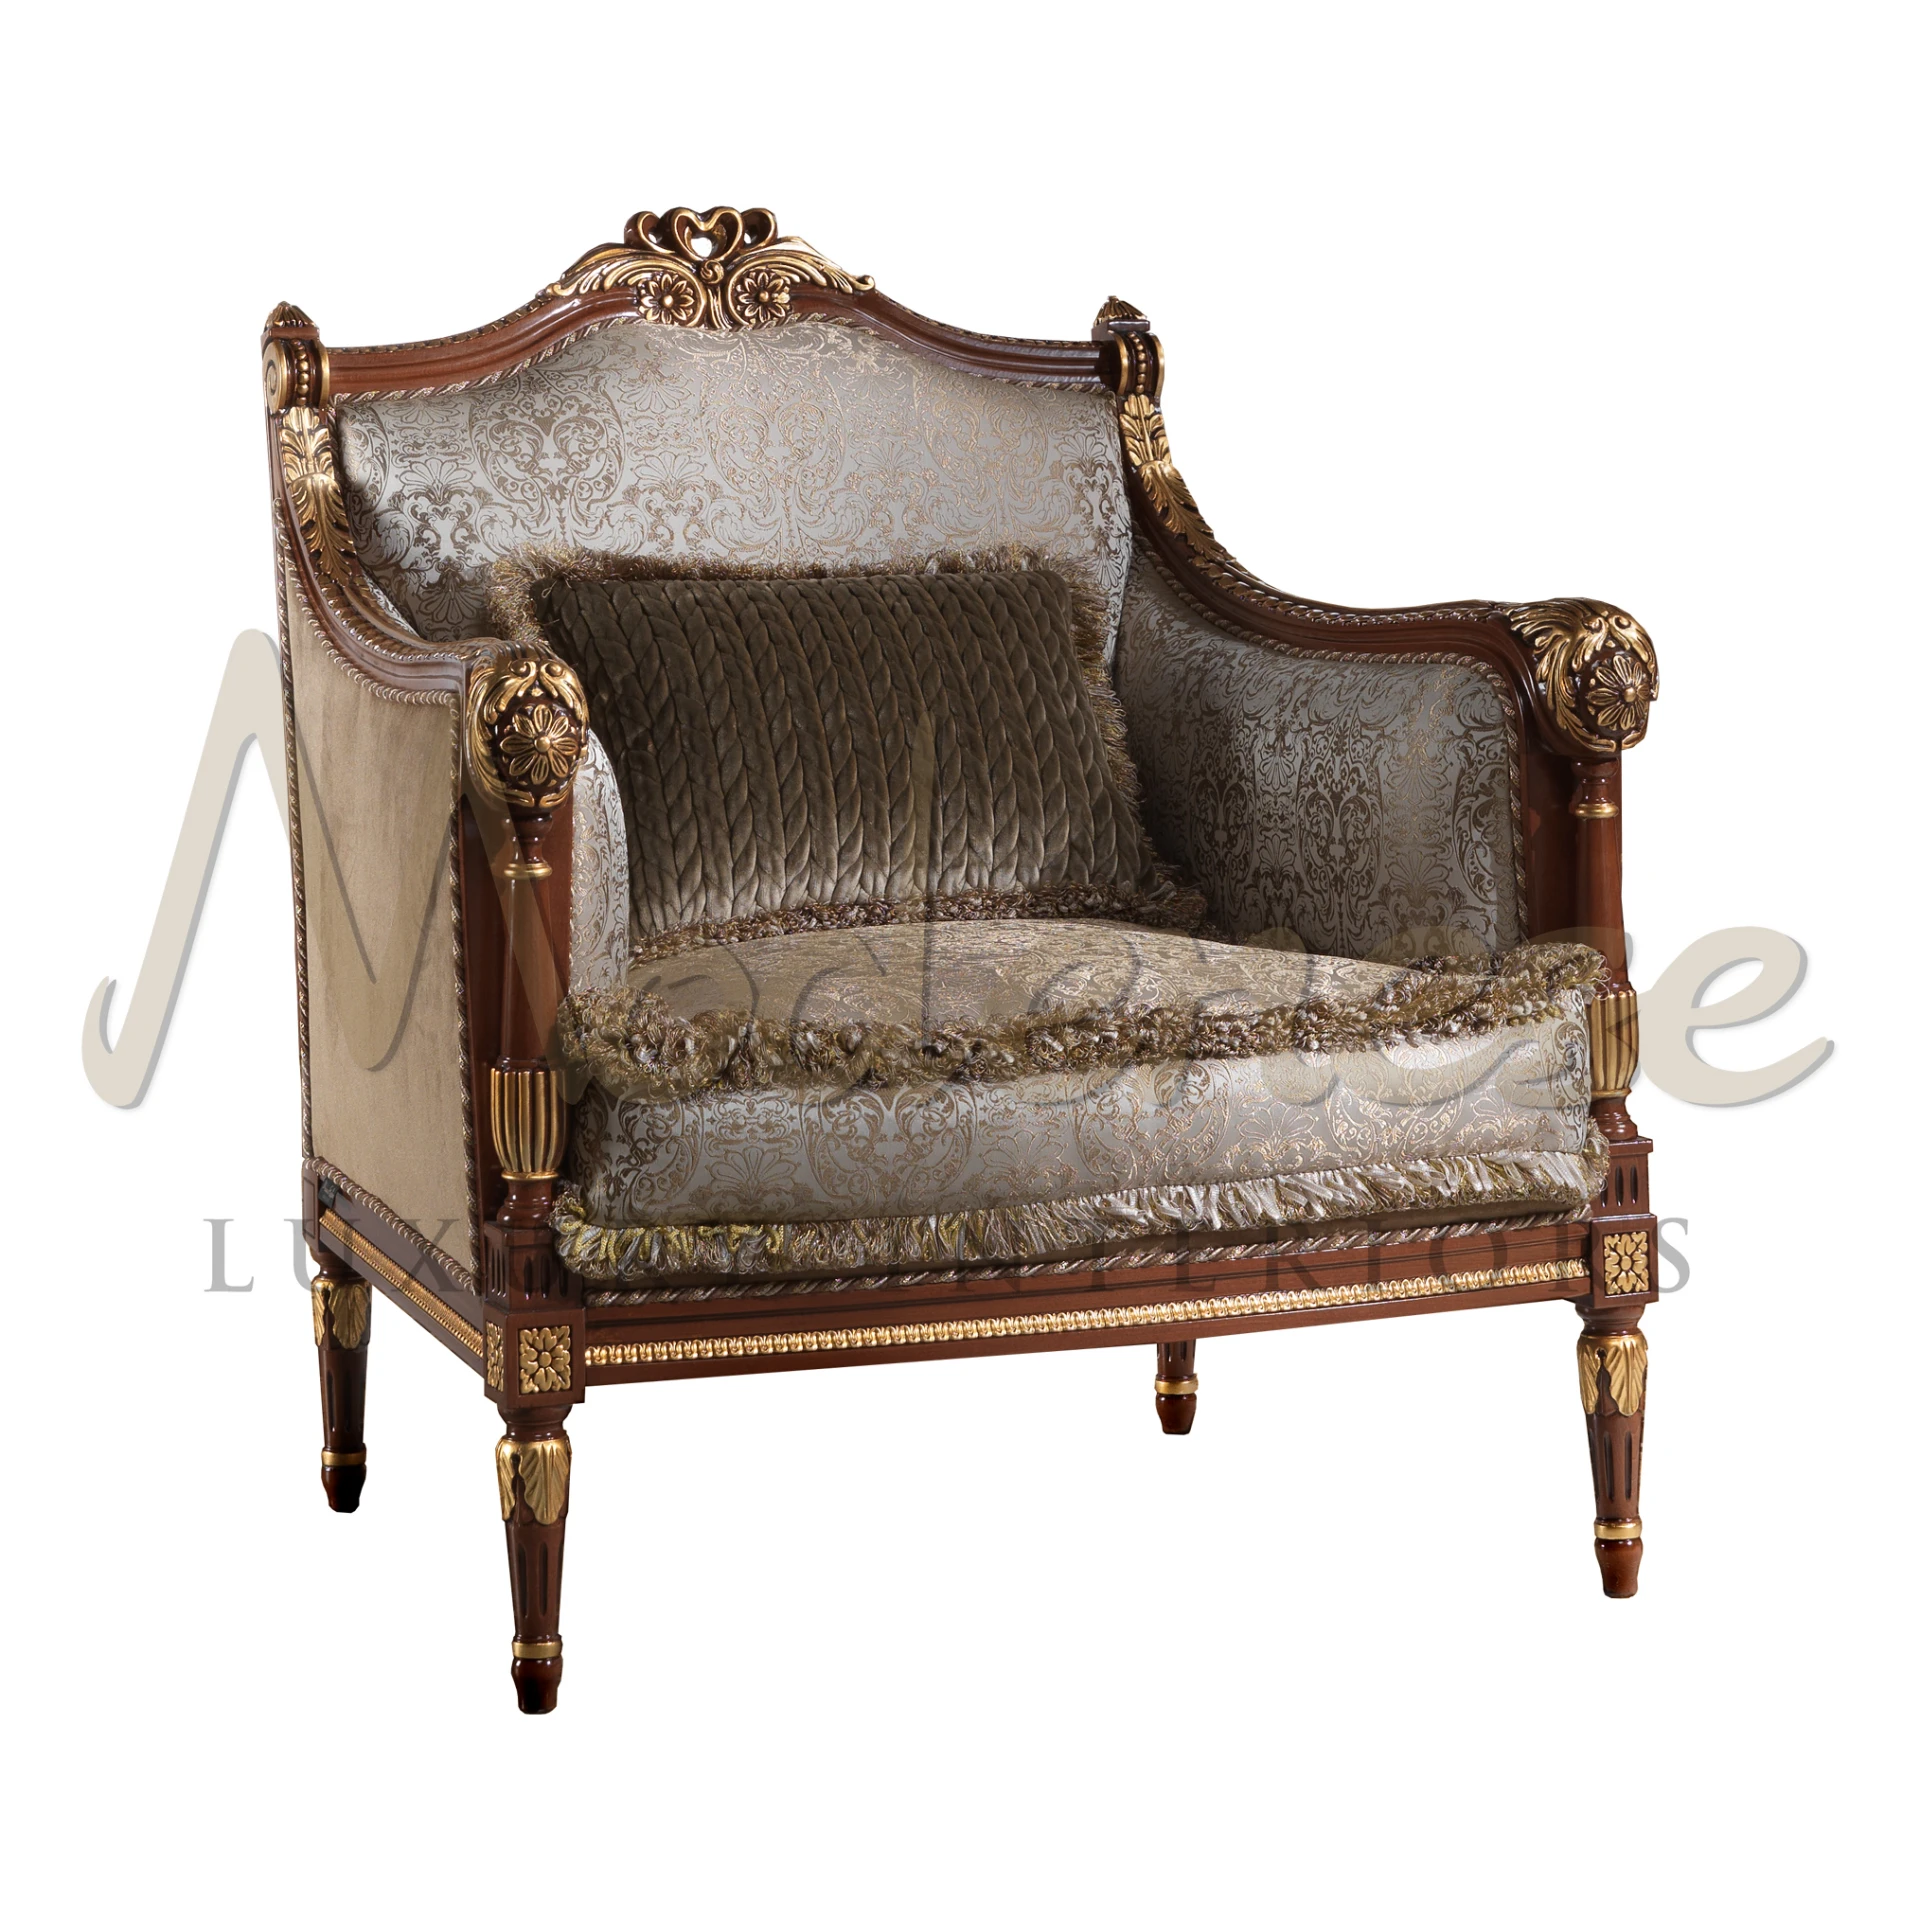 Sophisticated beige and gold two-seater couch with plush pillows and classic damask patterns, featuring elegant wood carvings.